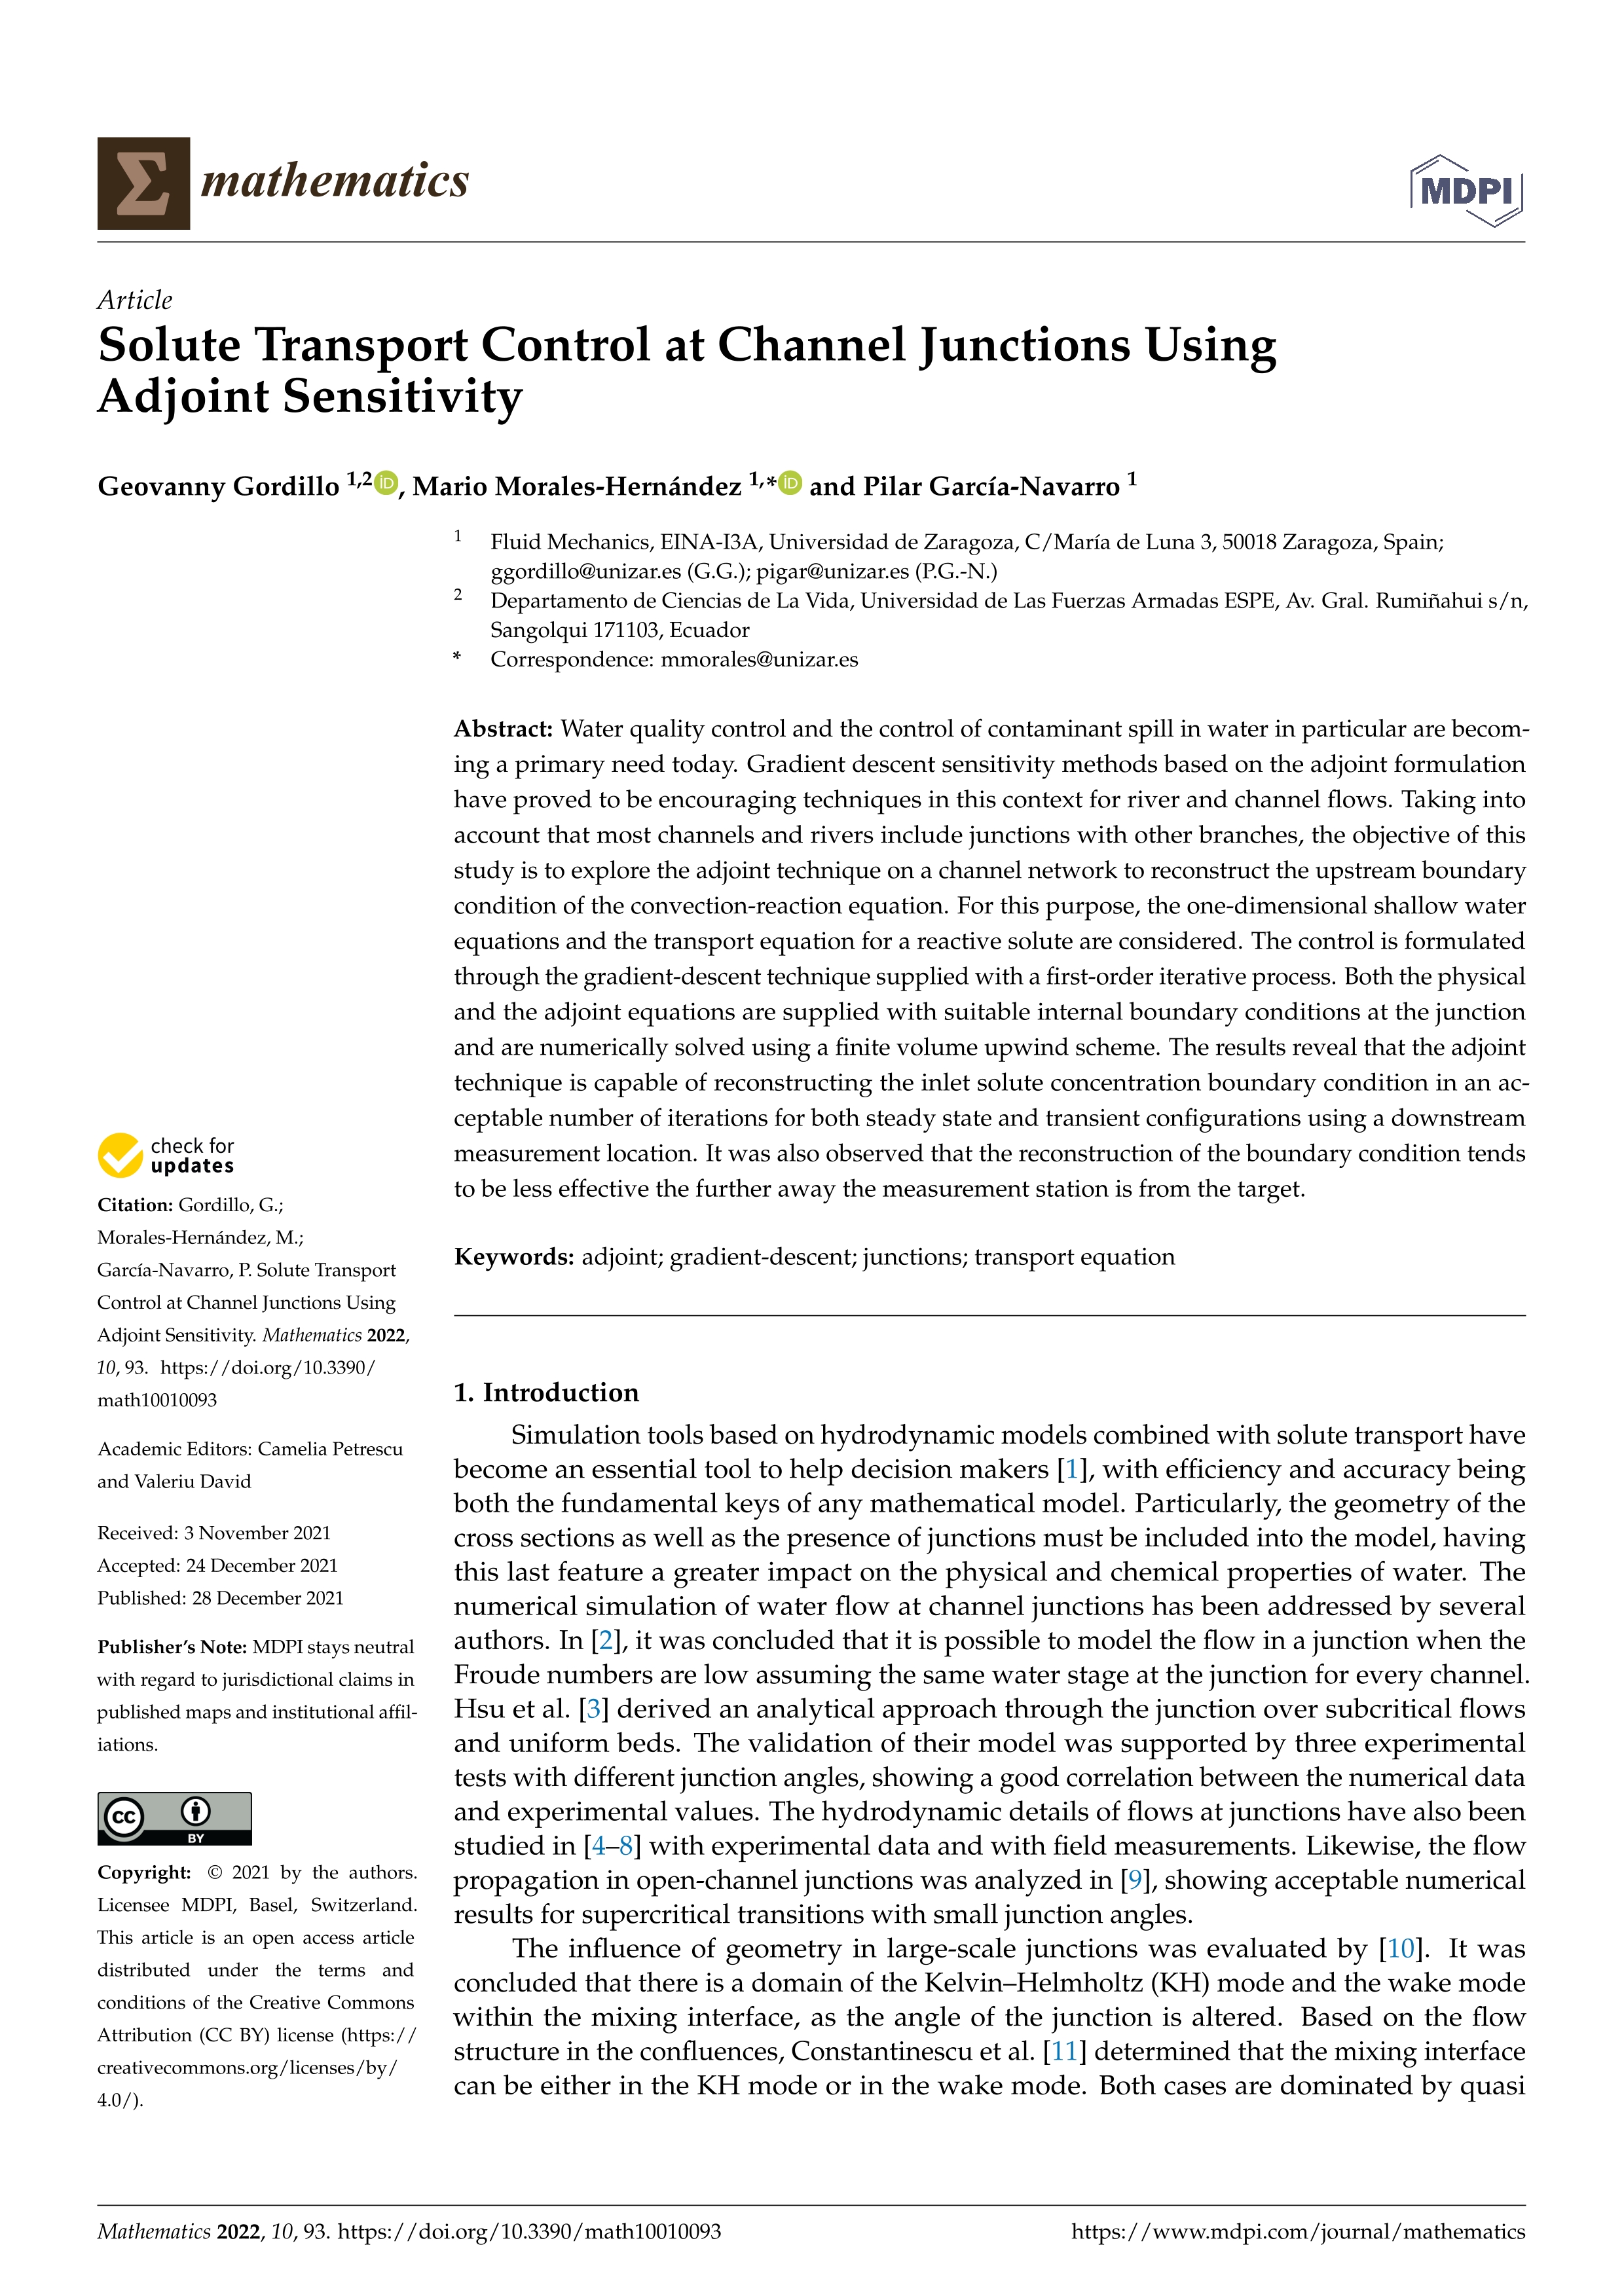 Solute Transport Control at Channel Junctions Using Adjoint Sensitivity